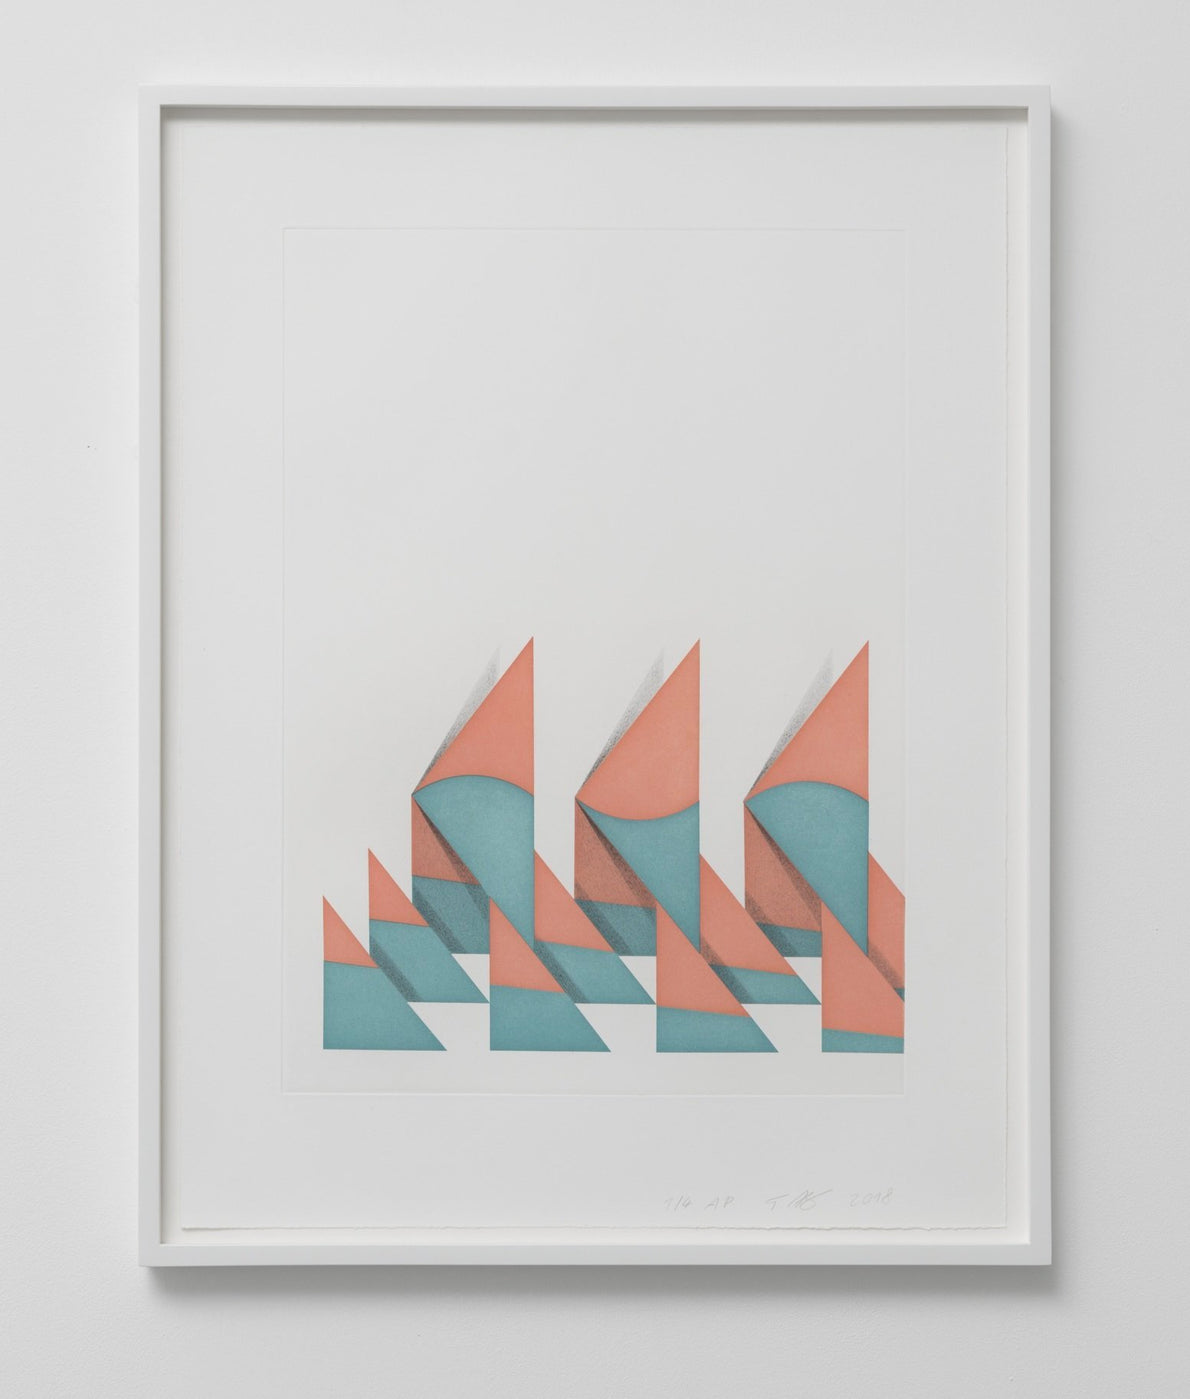 Tomma Abts: Untitled (Triangles), 2018